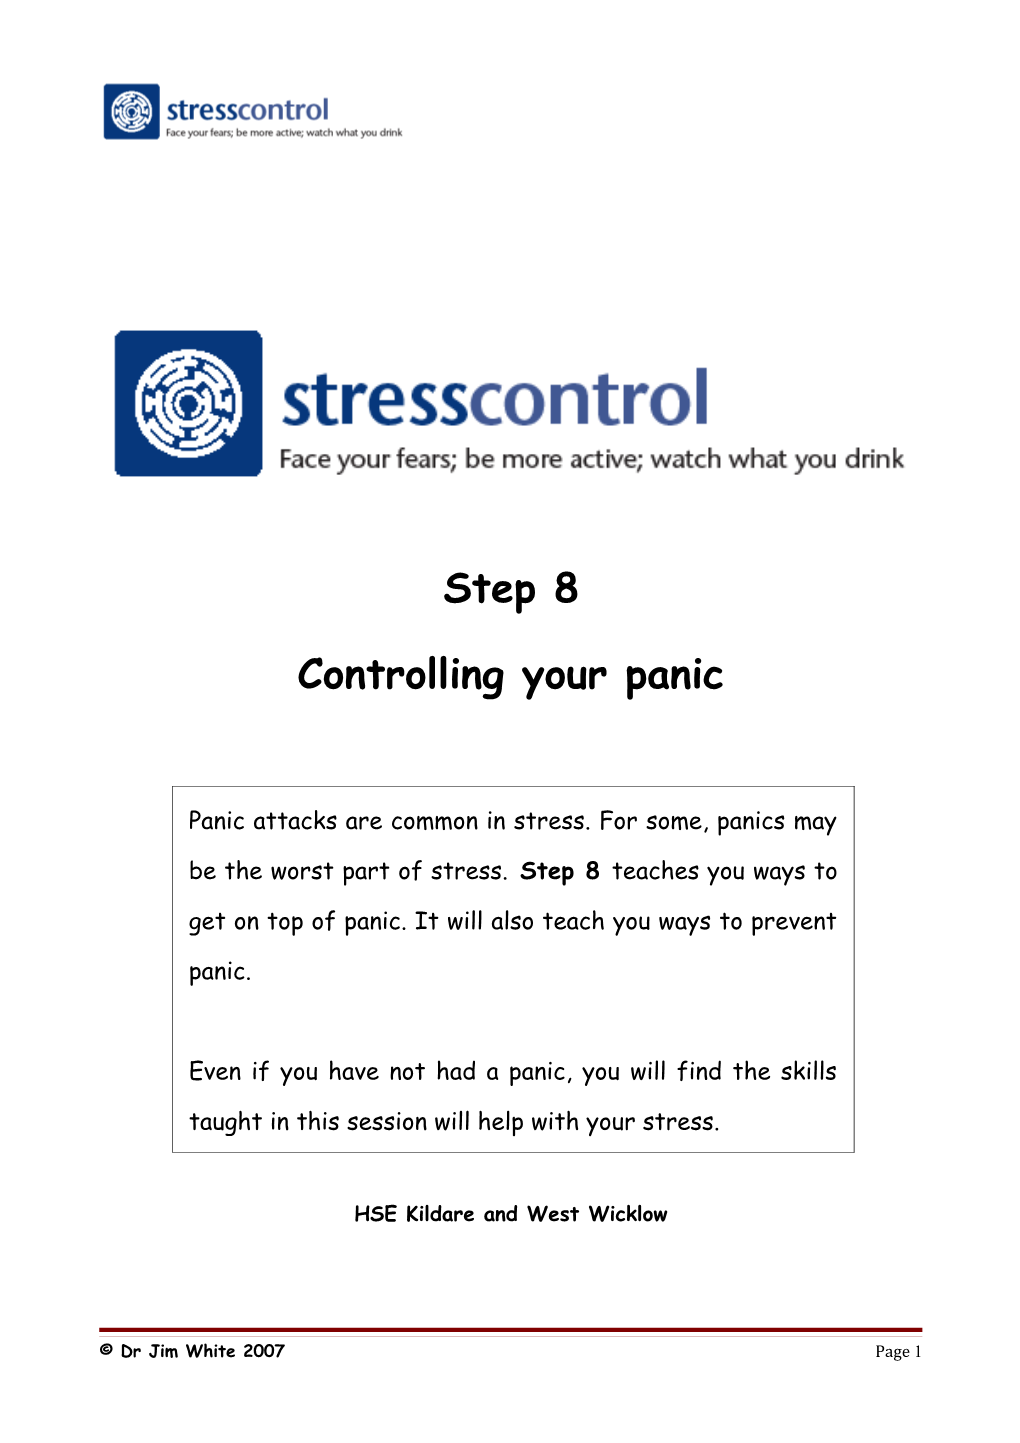 Controlling Your Panic